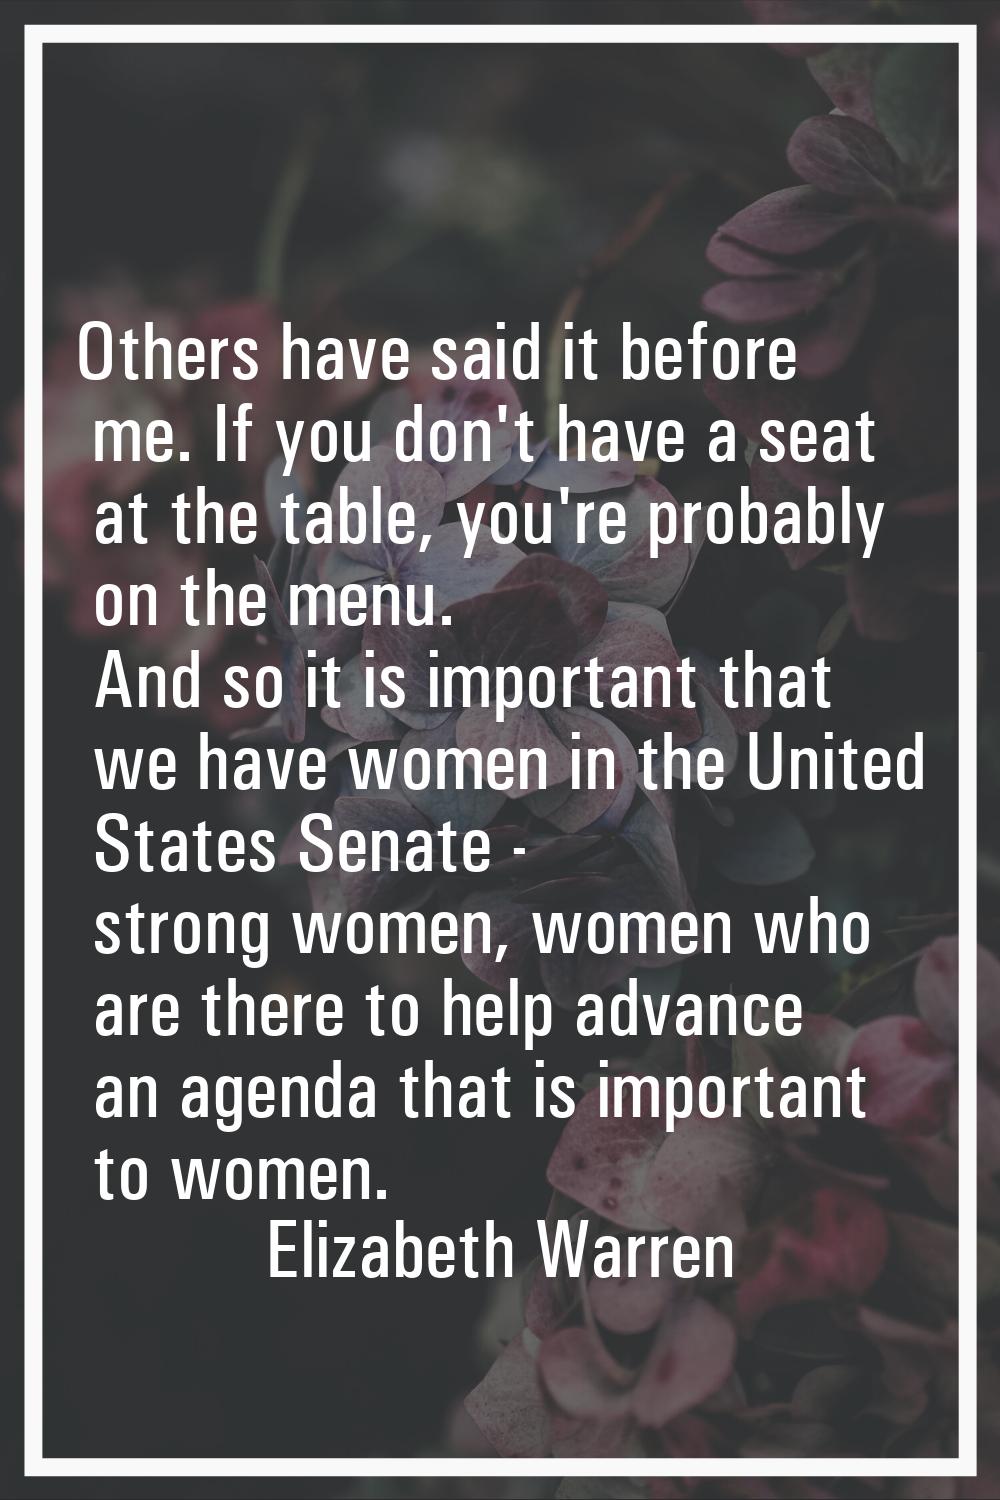 Others have said it before me. If you don't have a seat at the table, you're probably on the menu. 